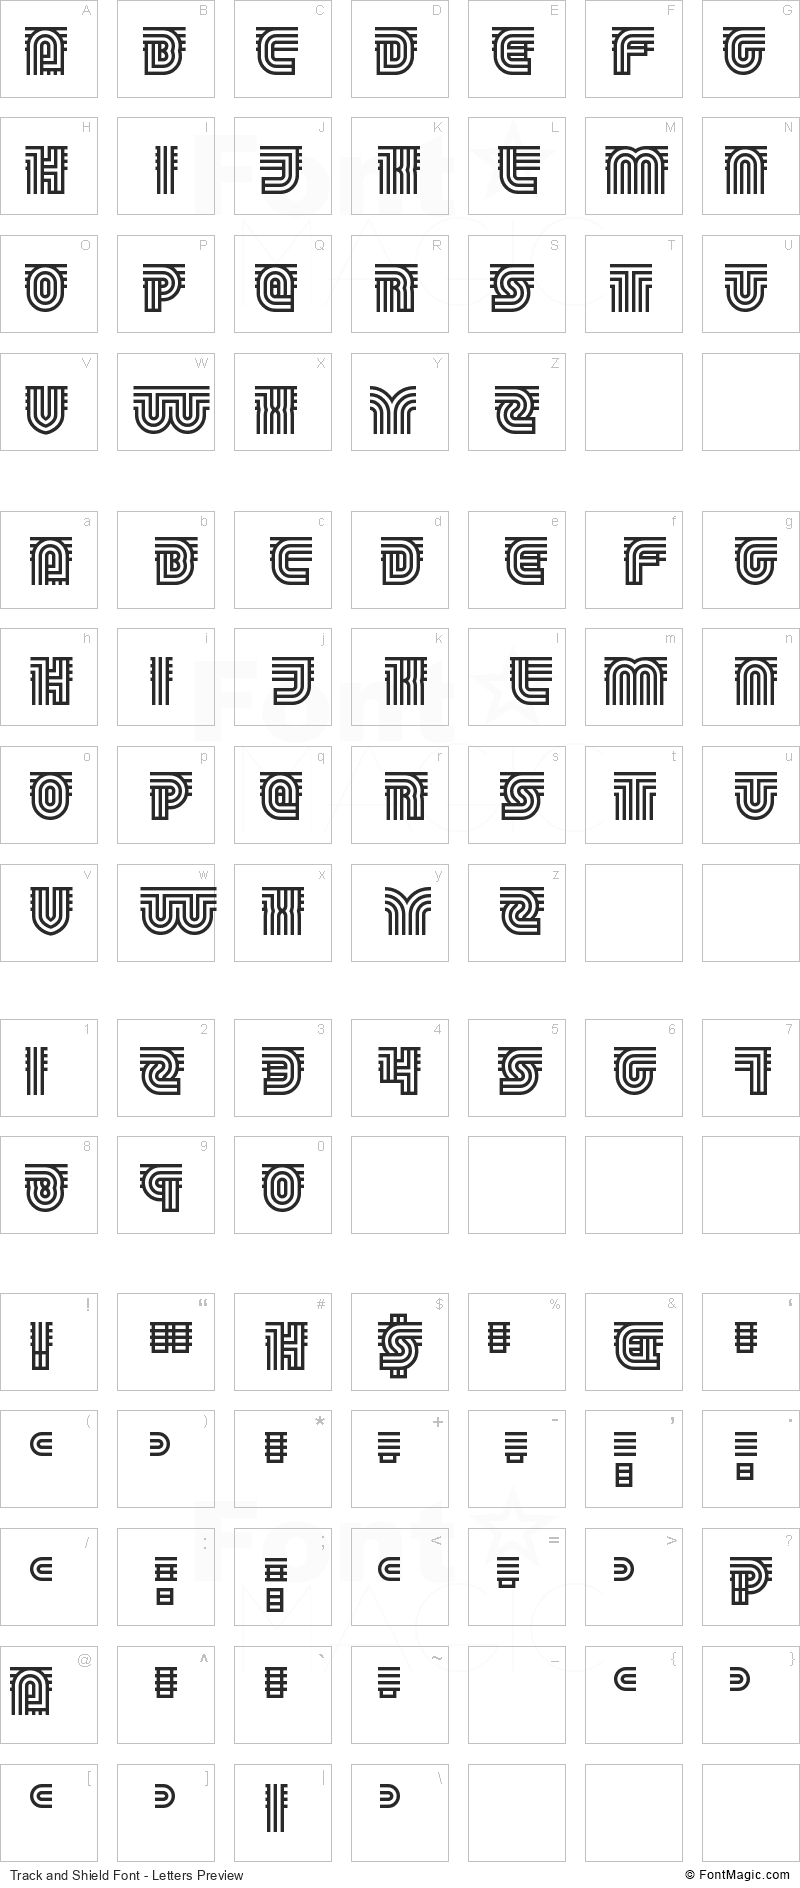 Track and Shield Font - All Latters Preview Chart